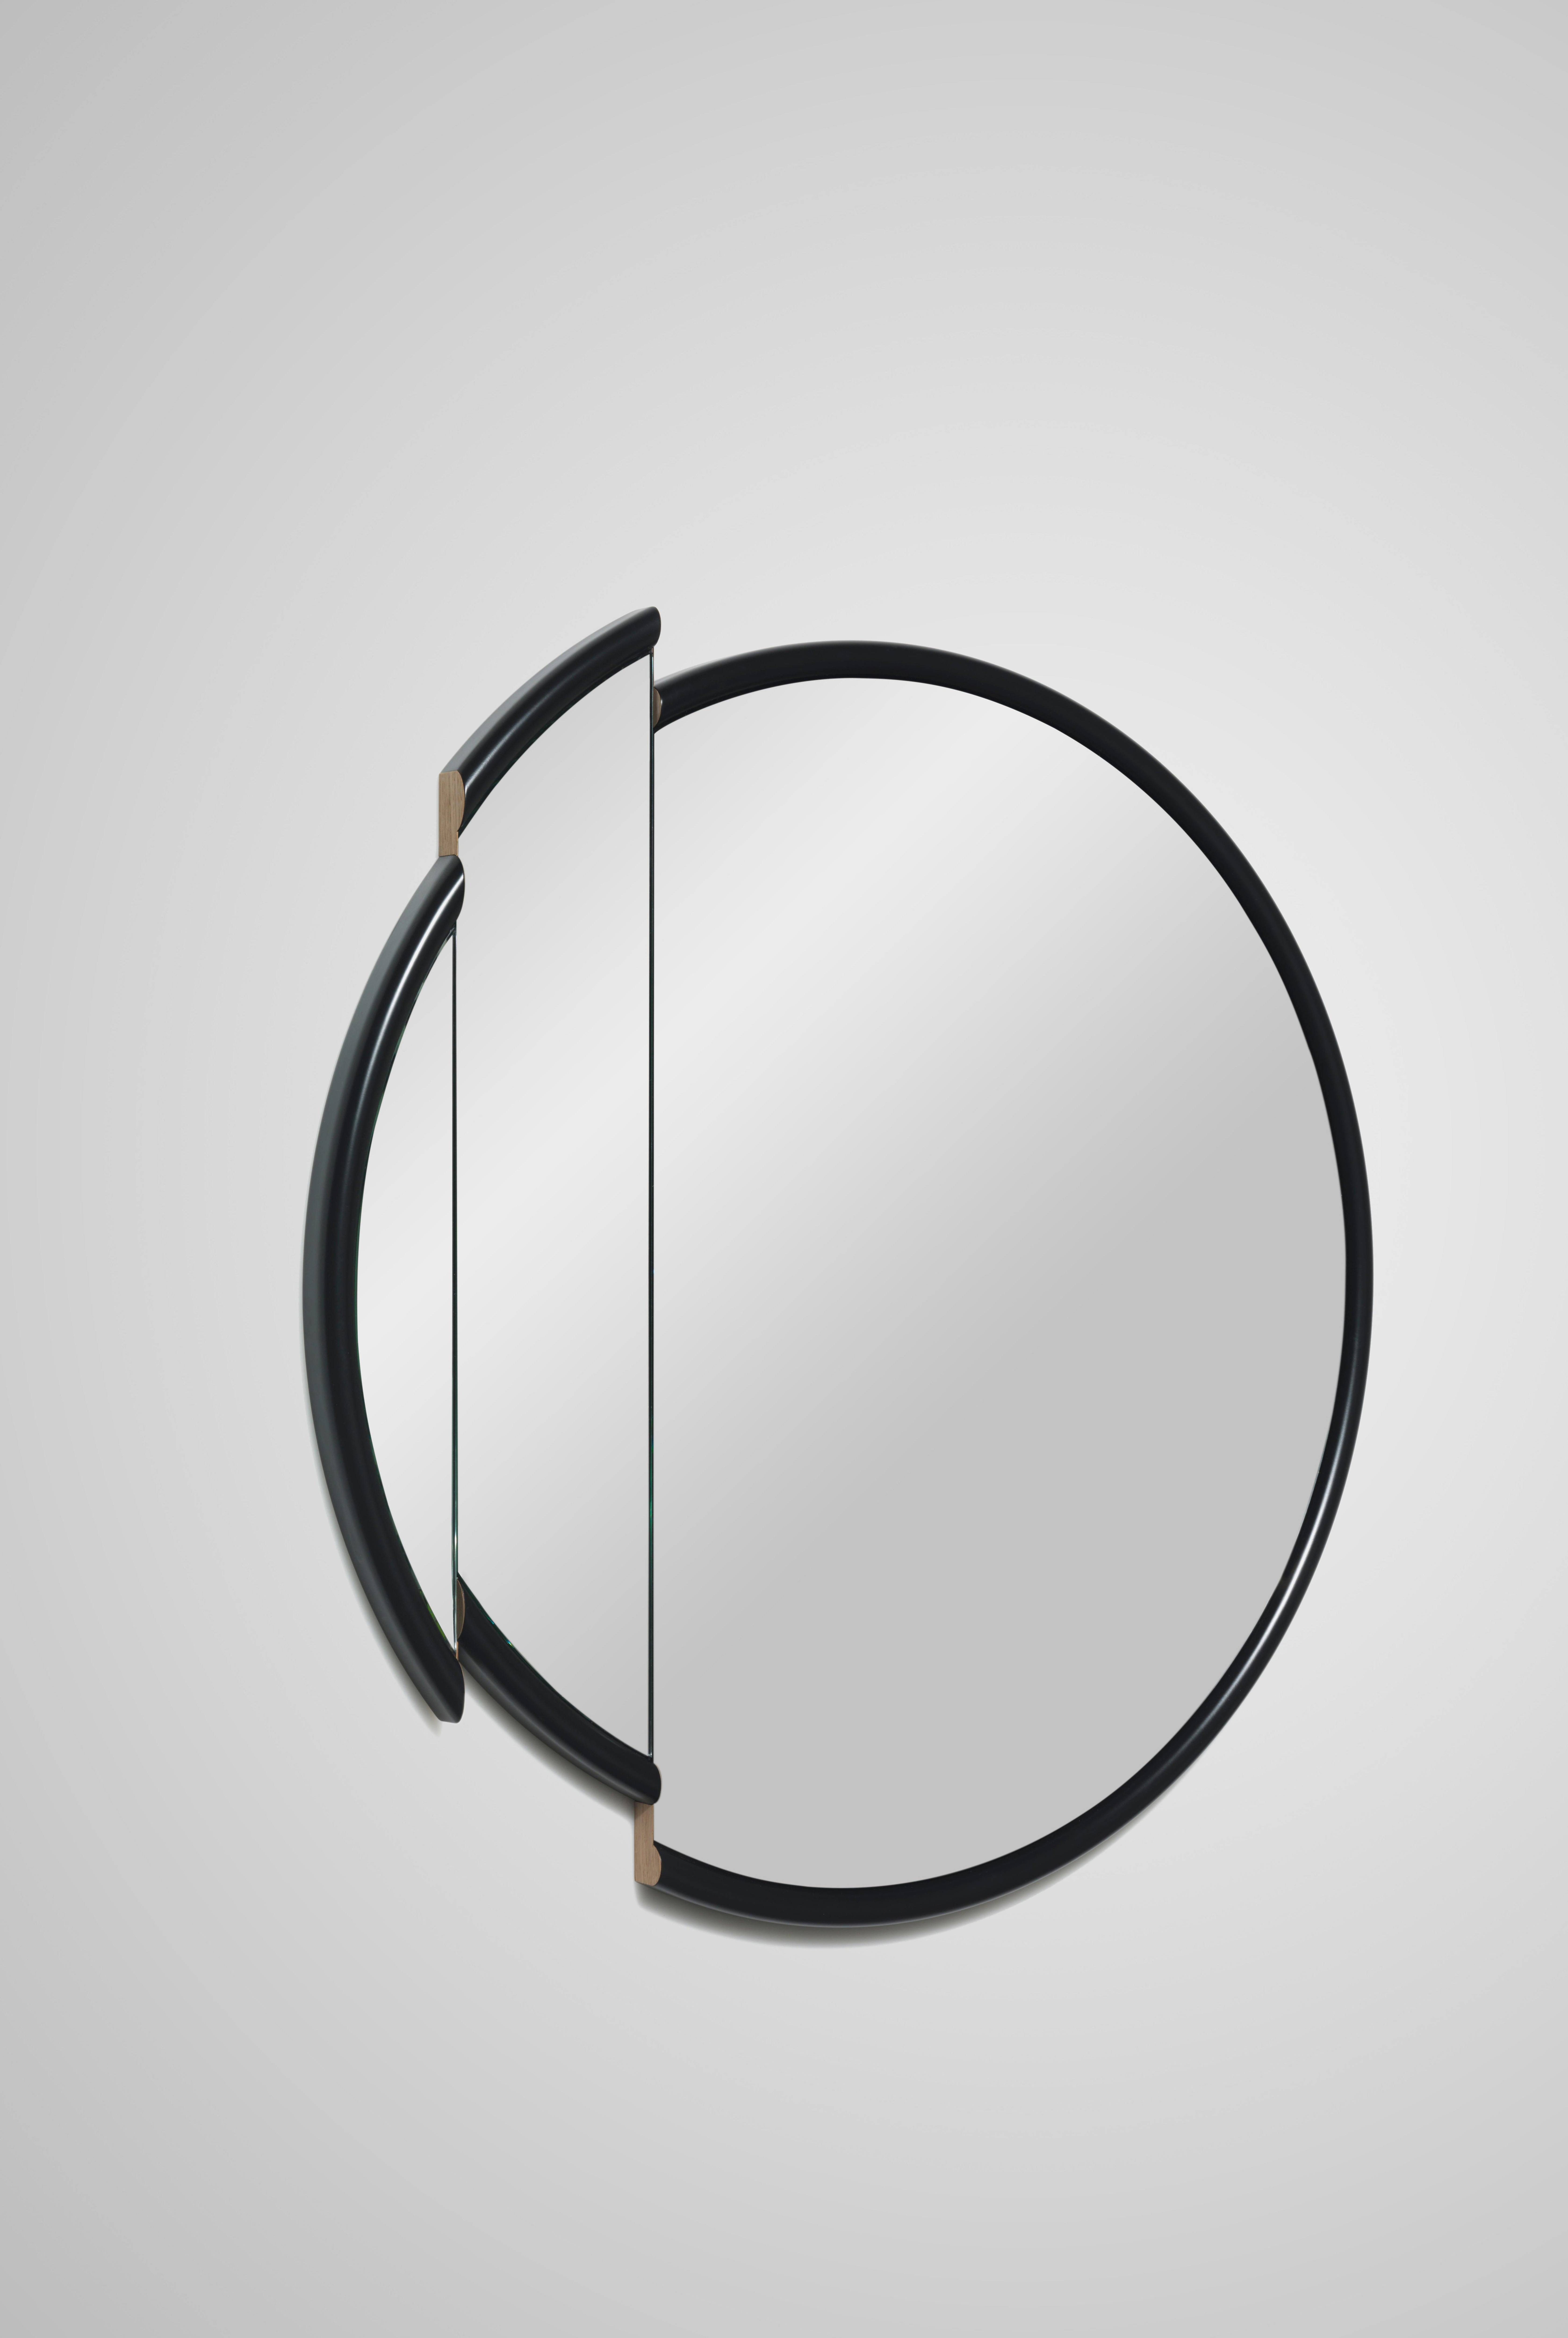 Lee Broom - SPLIT MIRROR ROUND In New Condition For Sale In New York, US